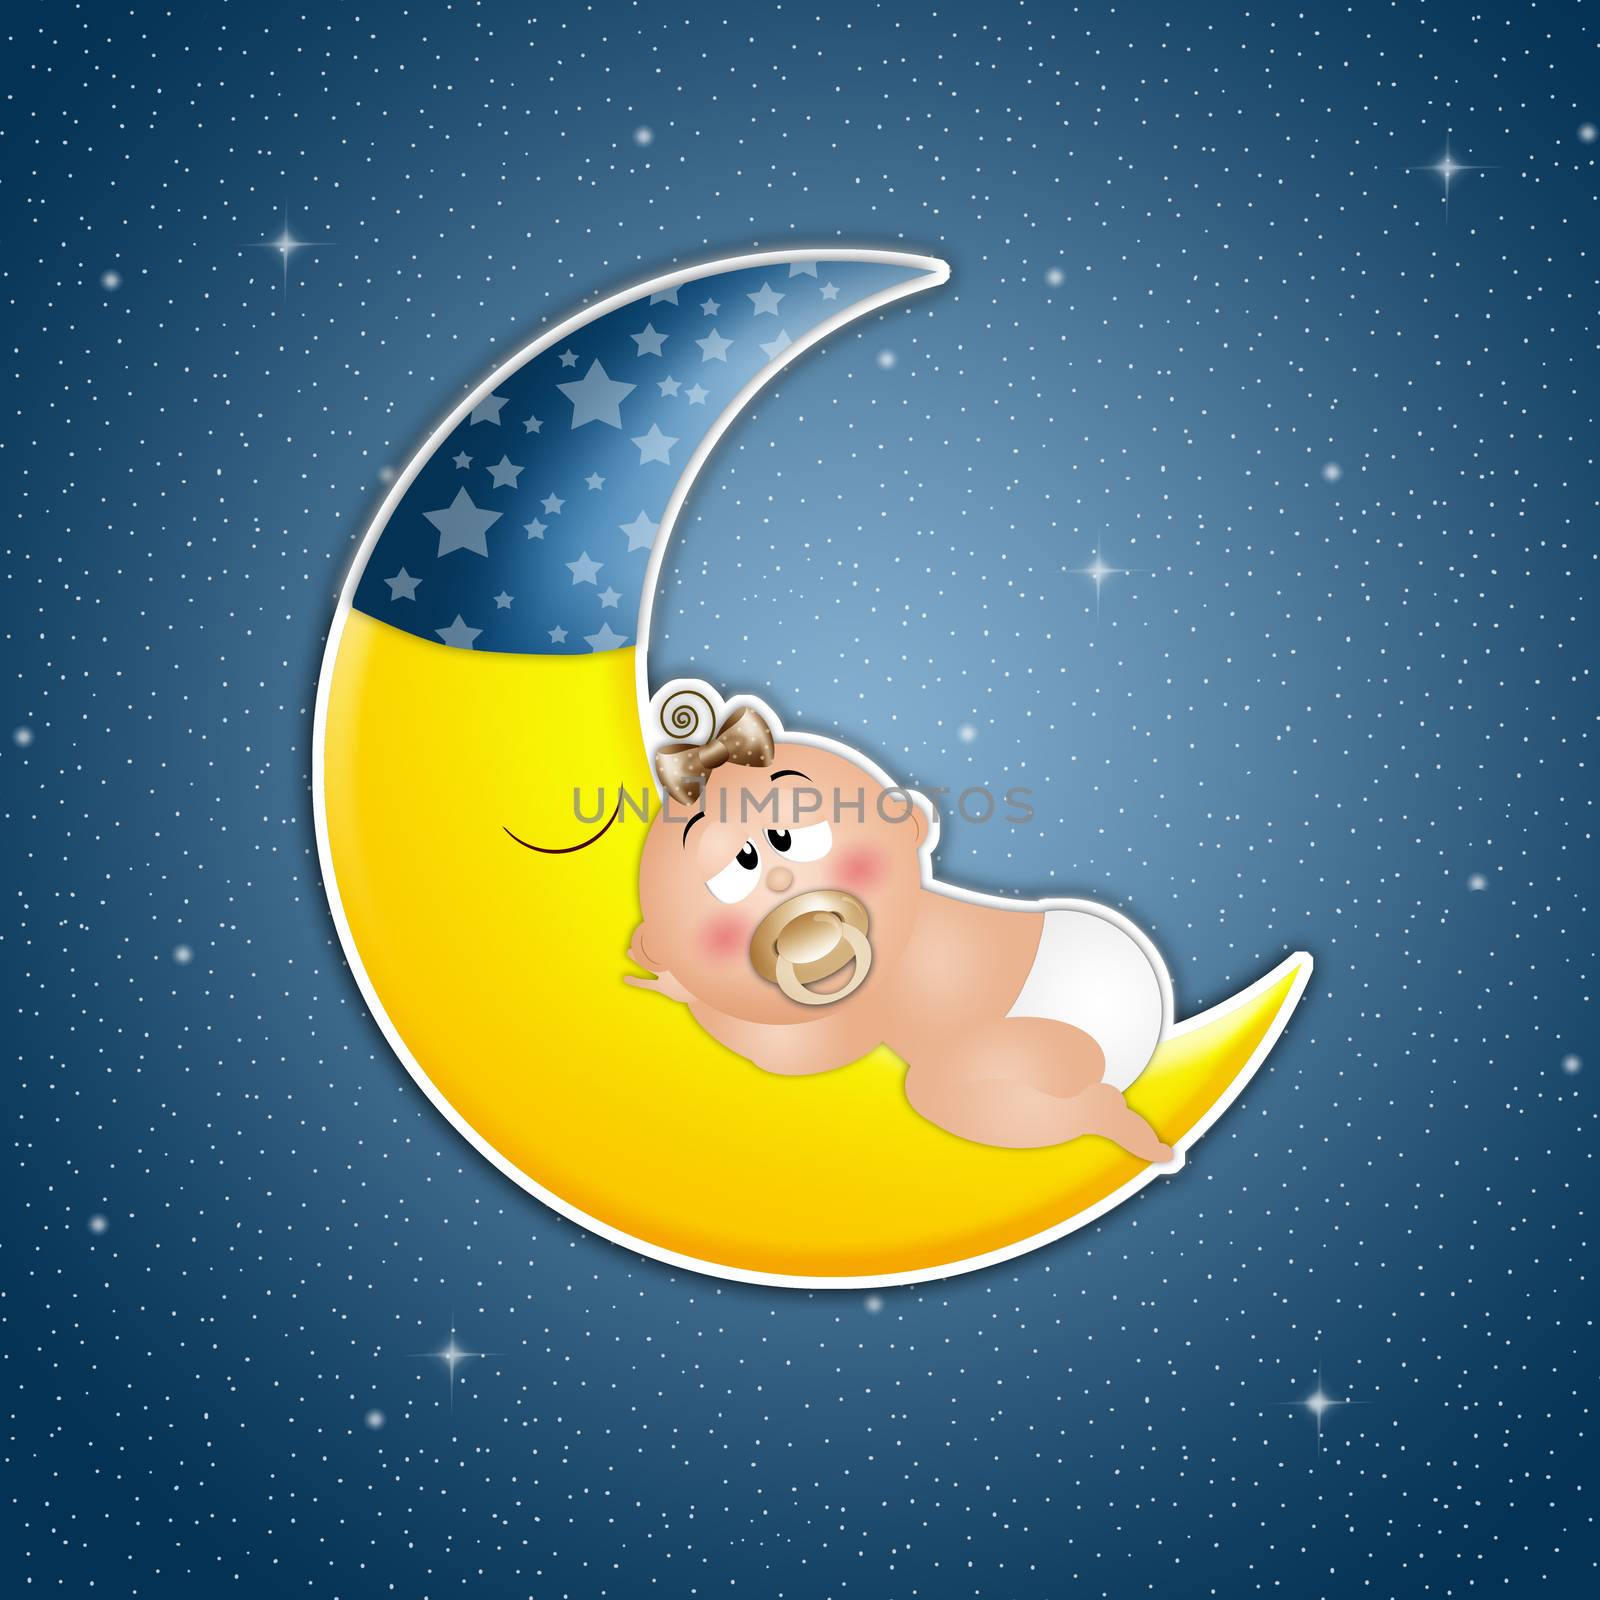 Baby asleep on the moon in the night by sognolucido